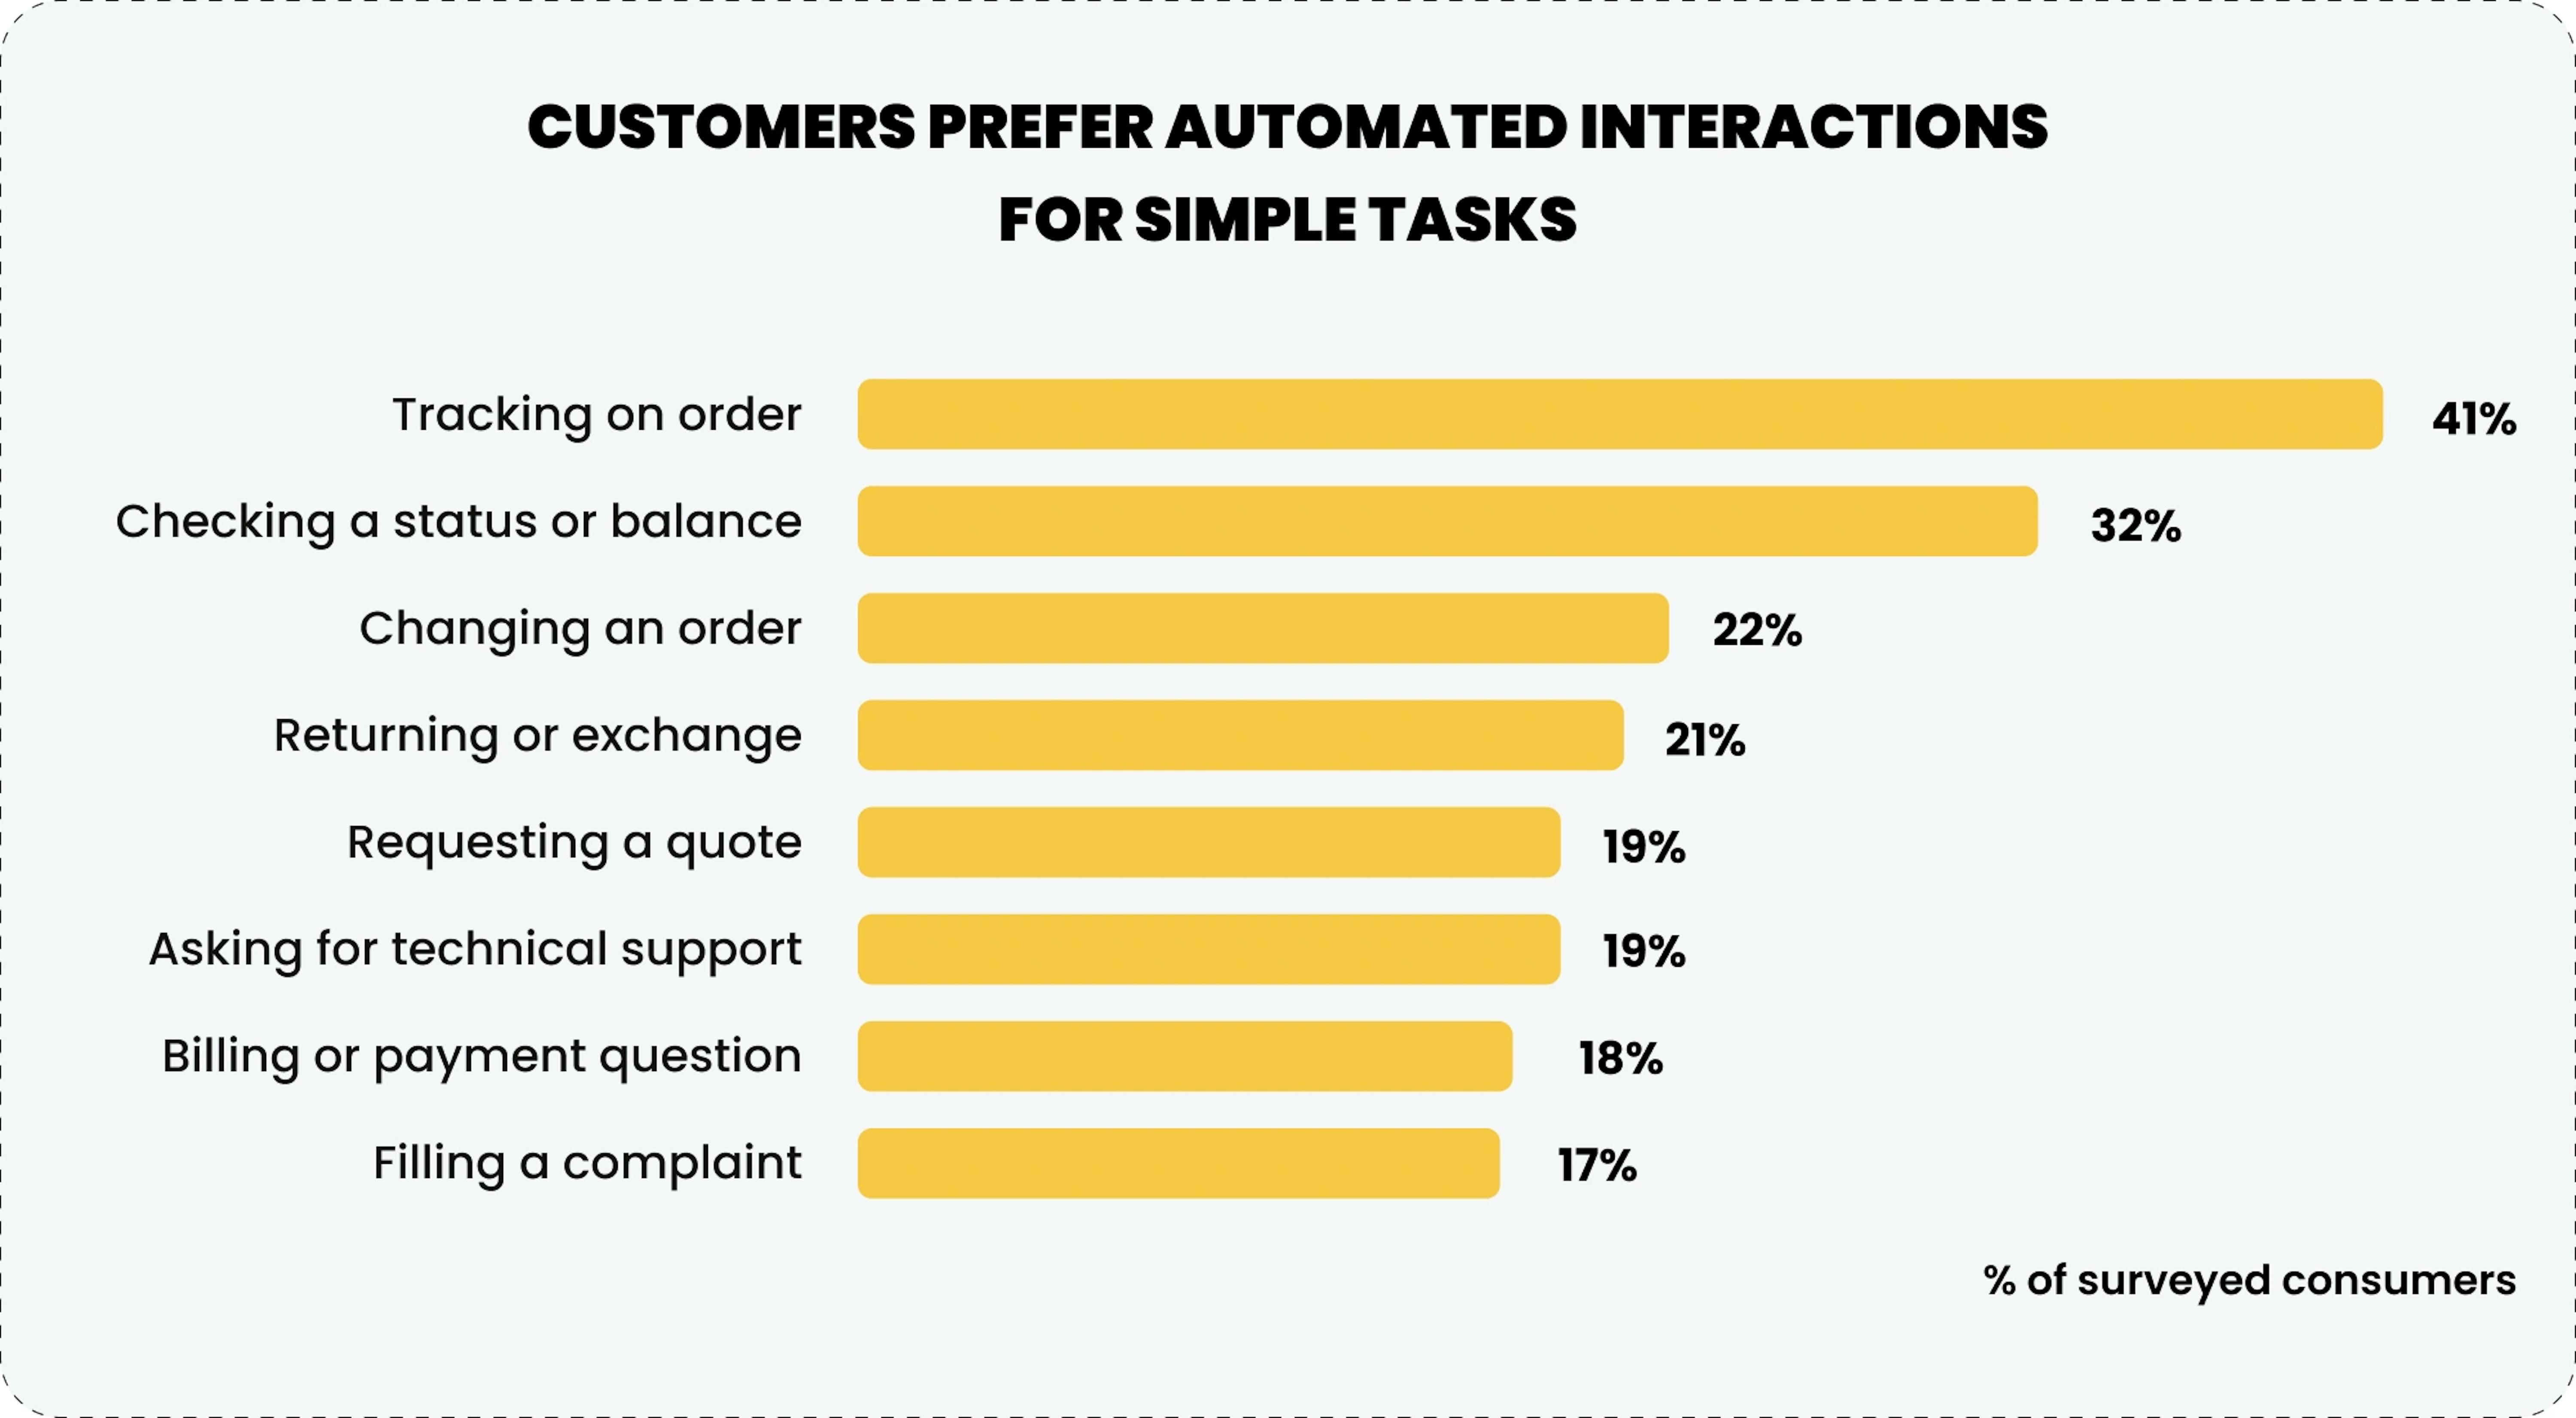 Customers prefer automated interactions for simple tasks